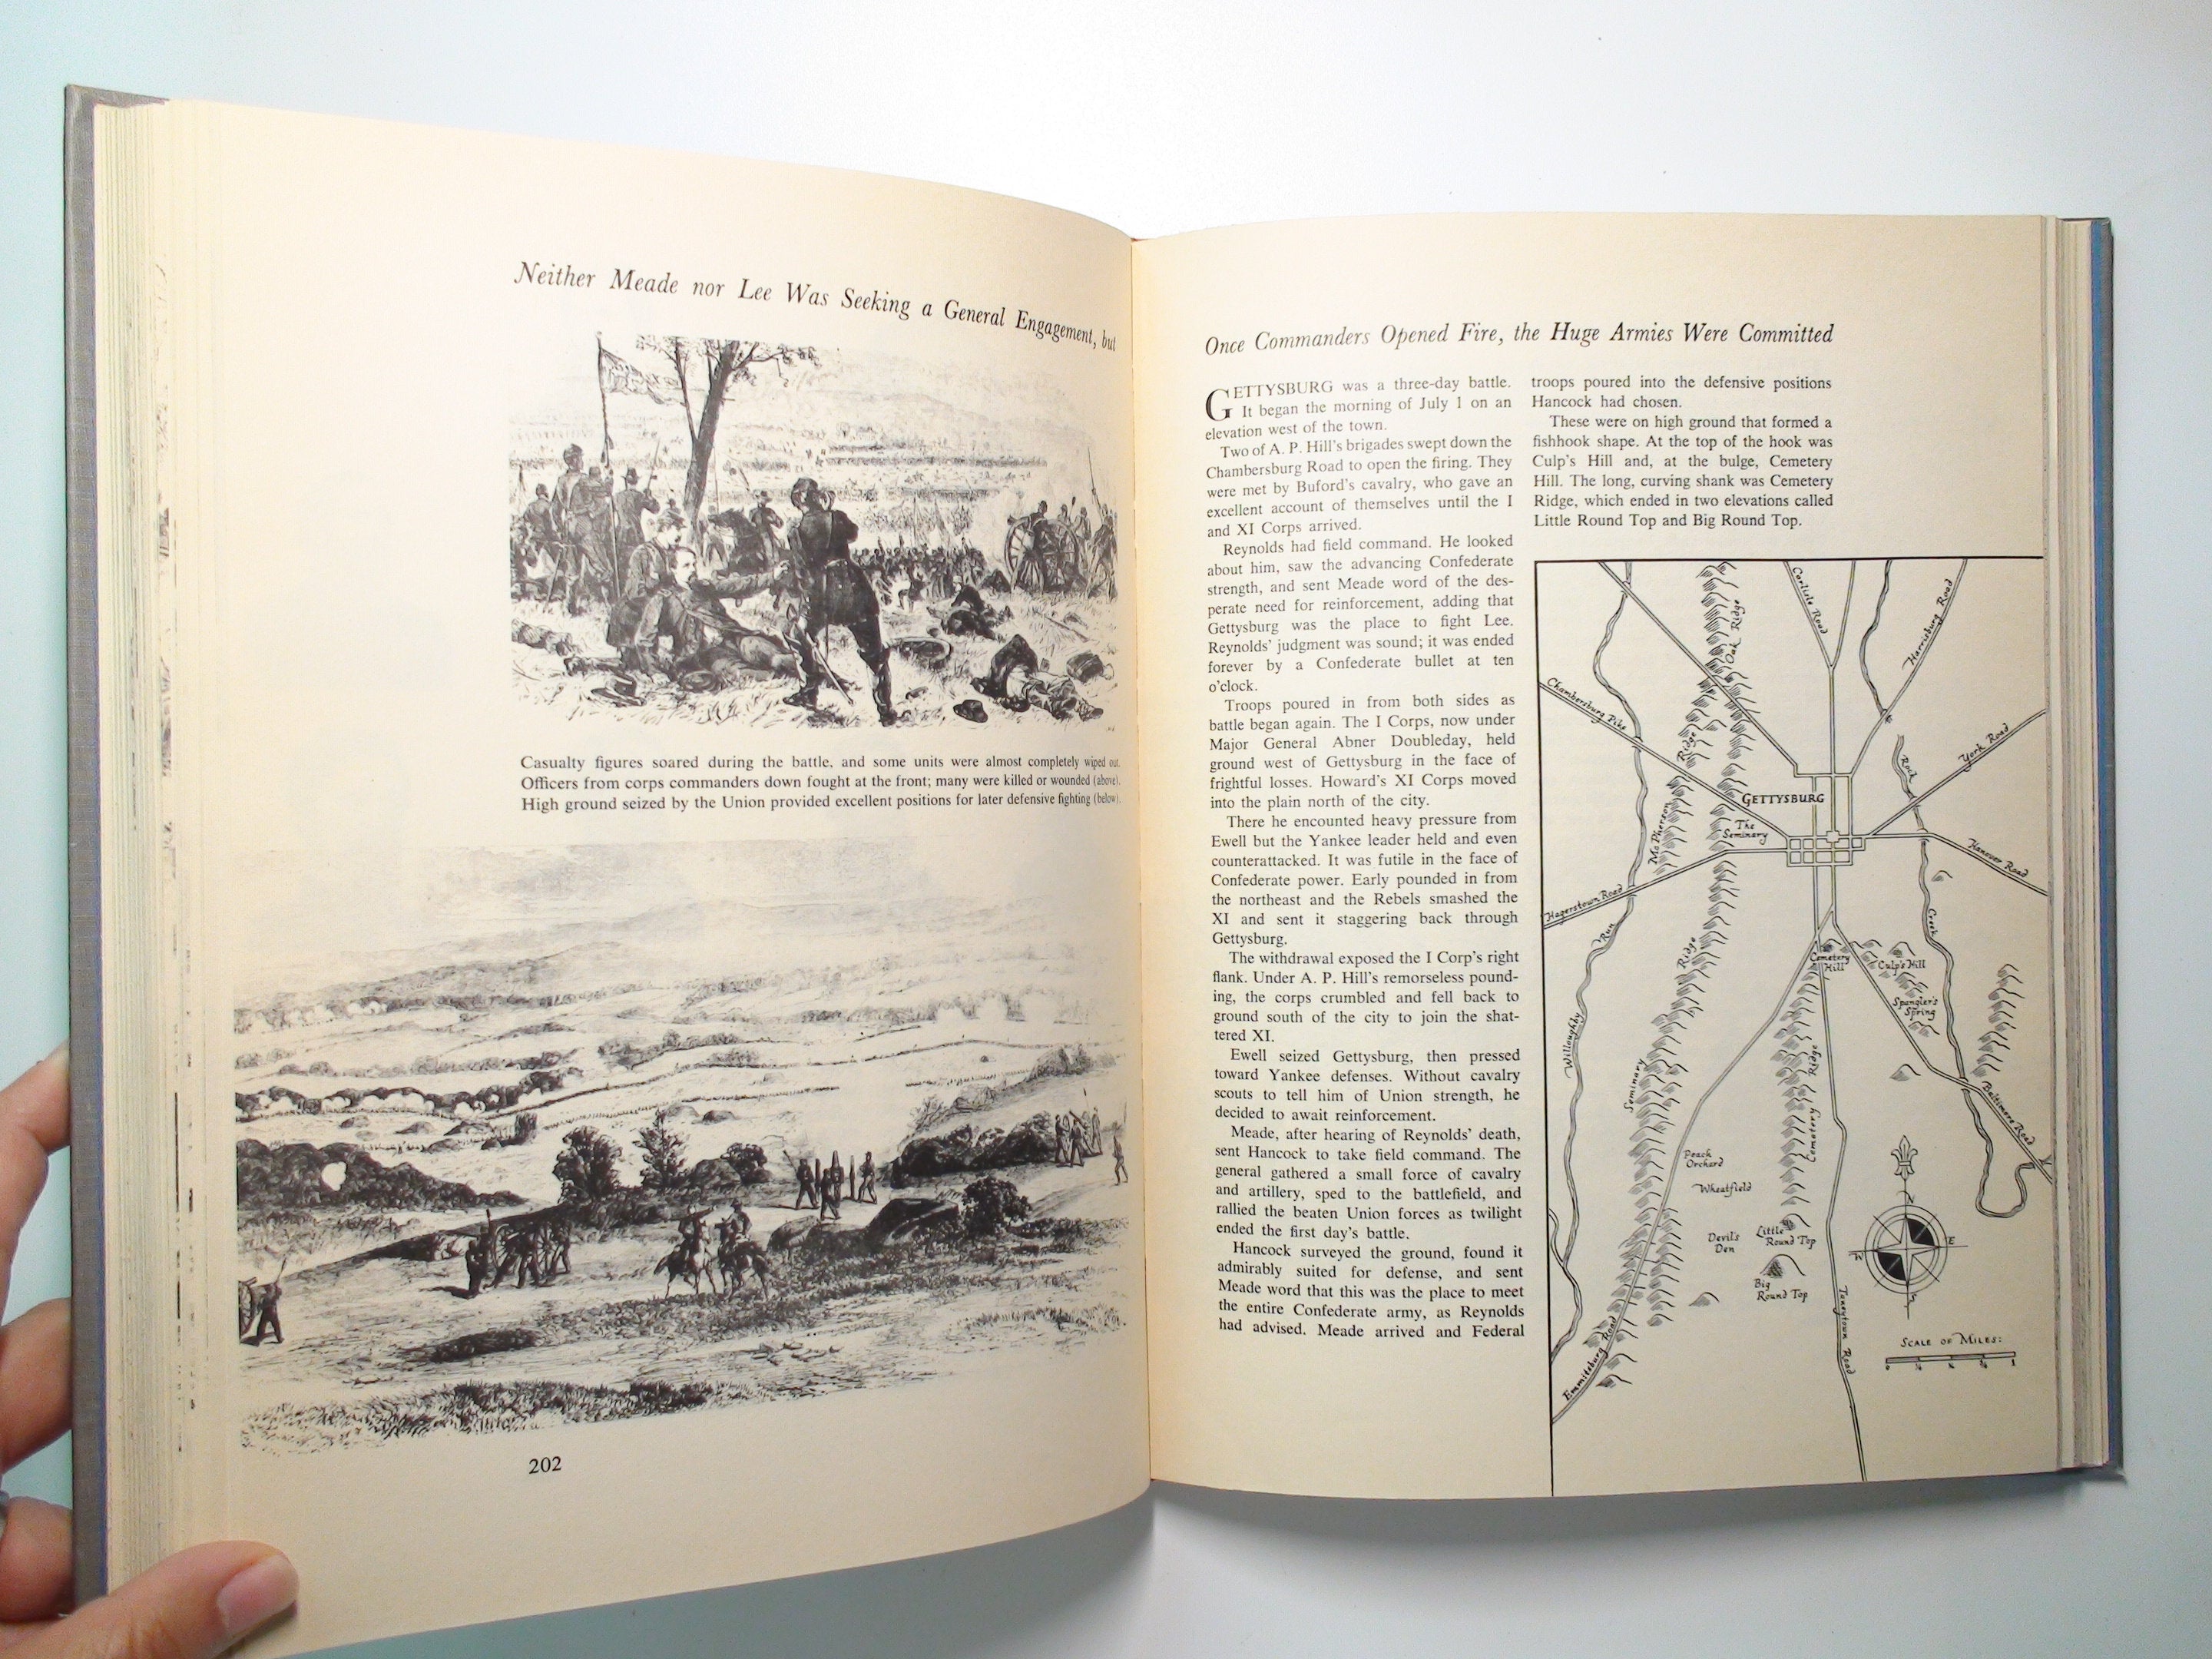 The Civil War A Pictorial Profile by John S. Blay, Illustrated, 1st Ed, 1958